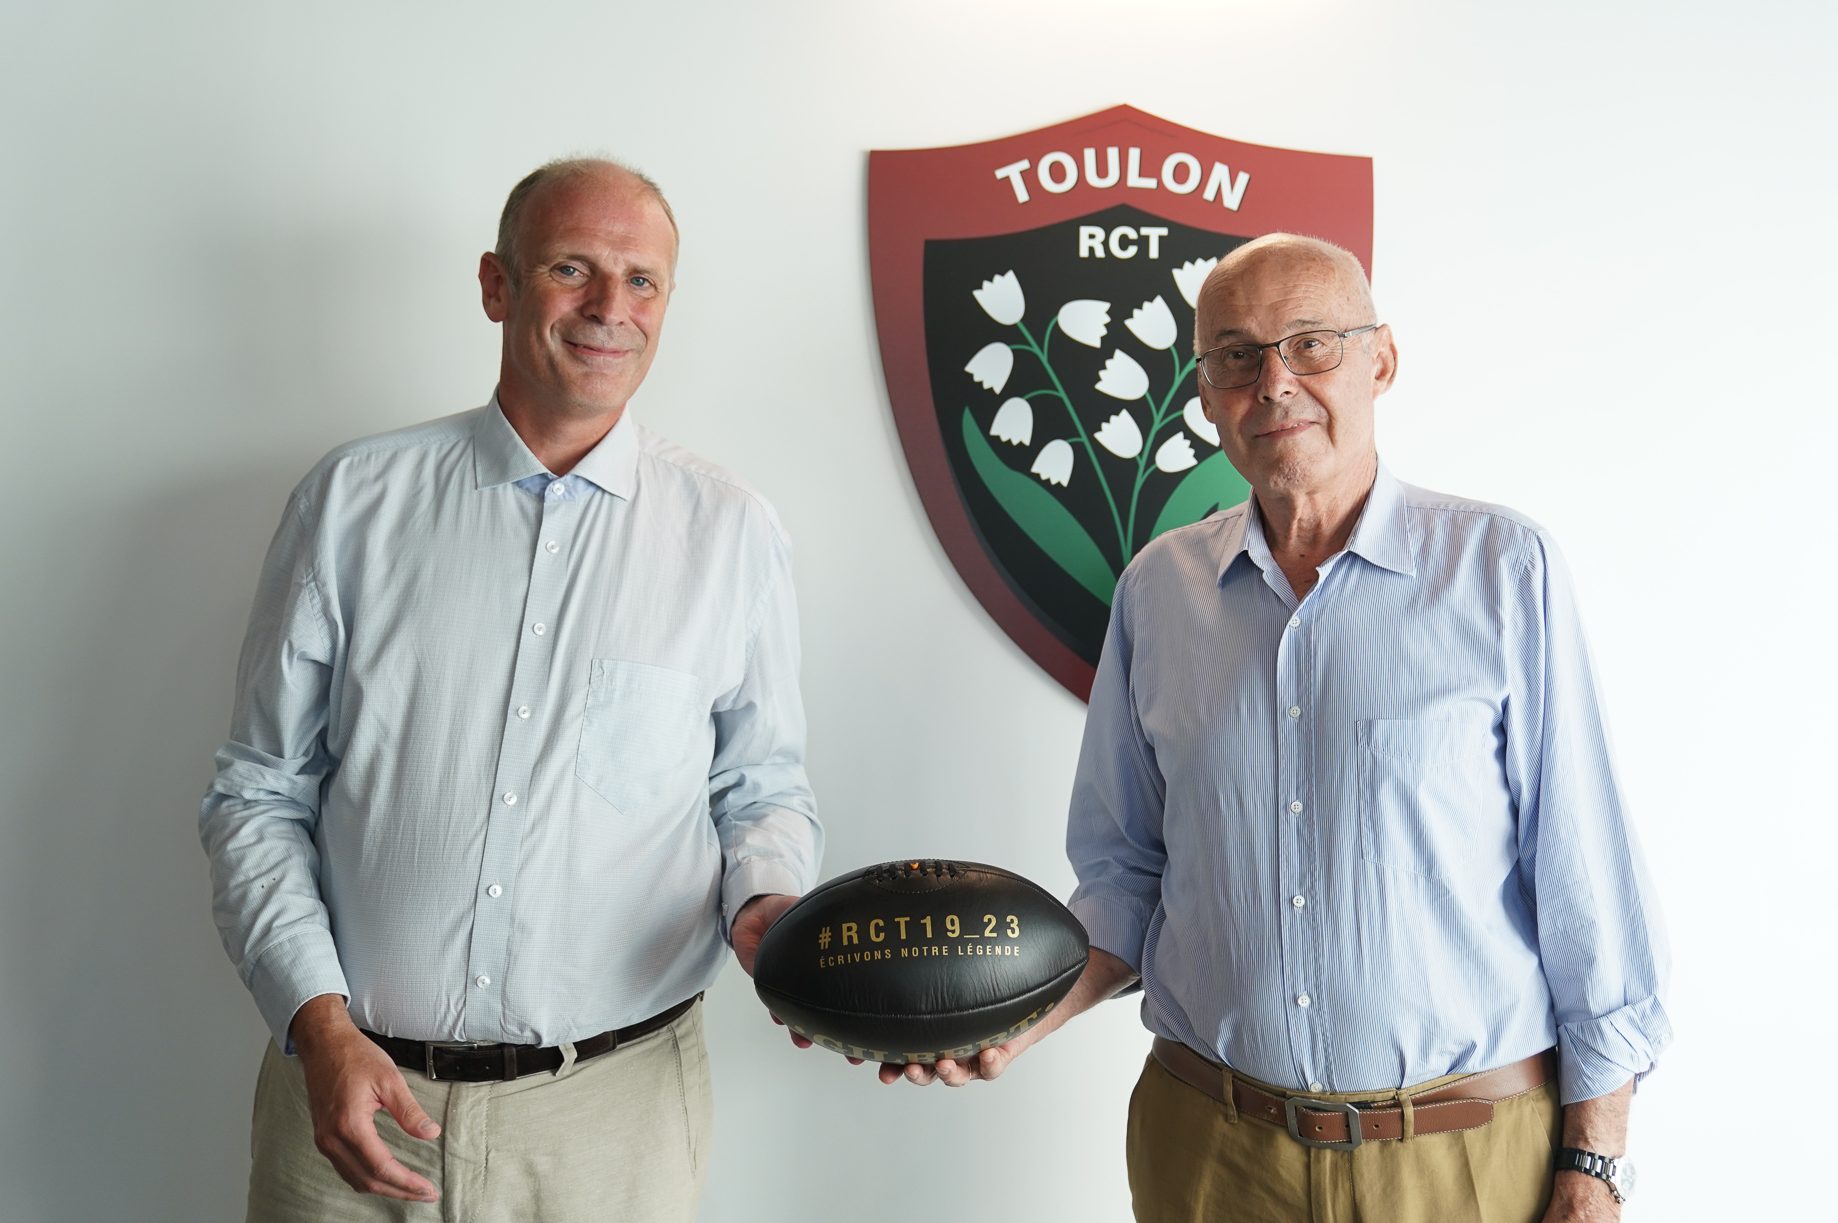 RC Toulon Veolia Charte 15 engagements RCT Ecologie Rugby